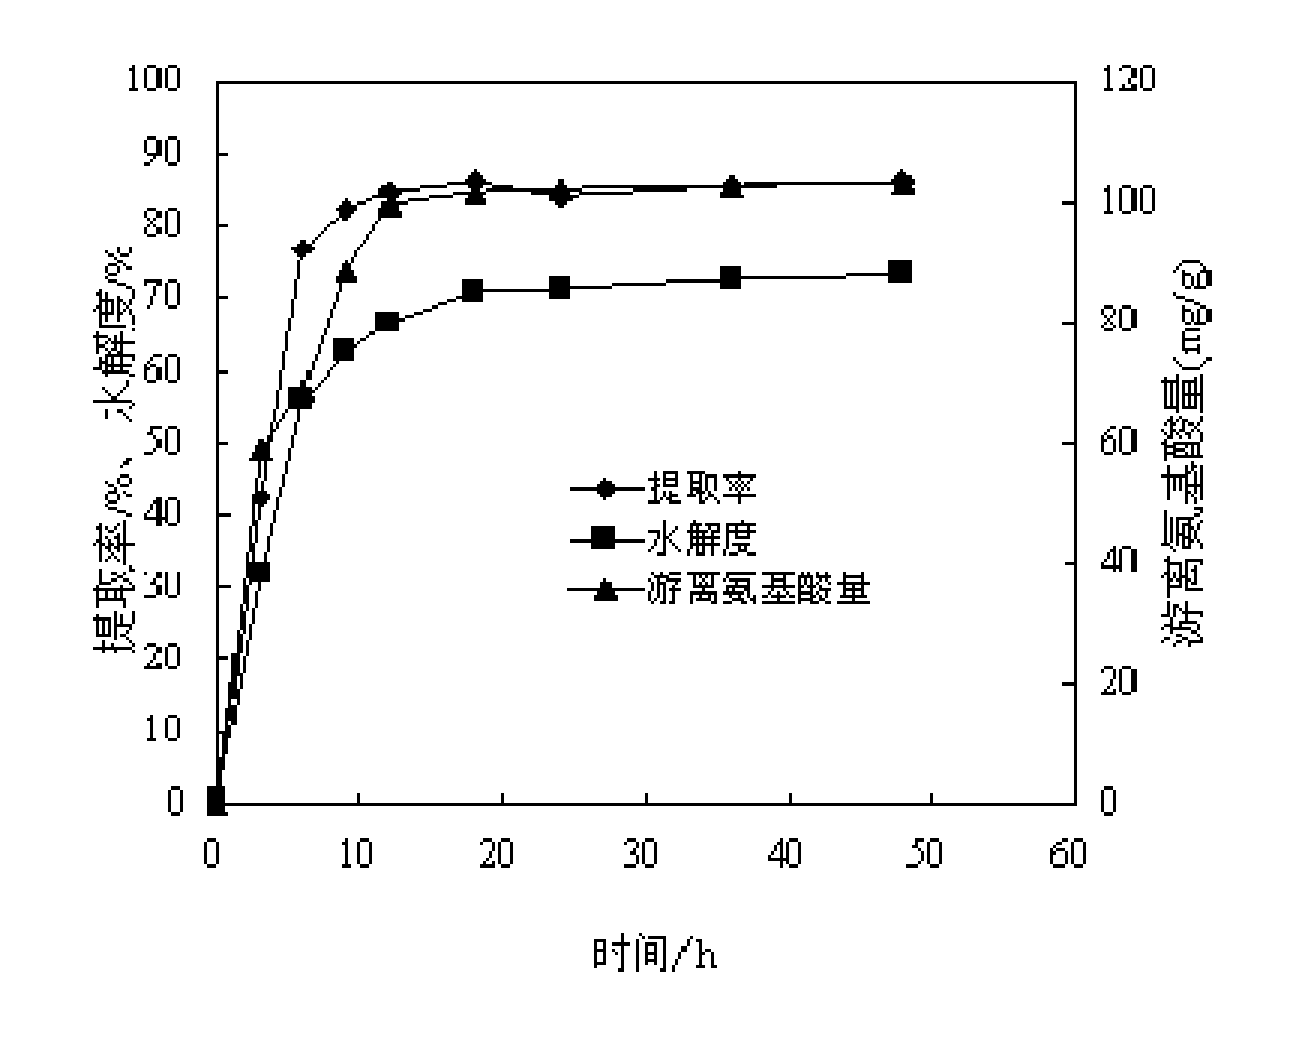 Method for preparing collagen peptide from fish scales